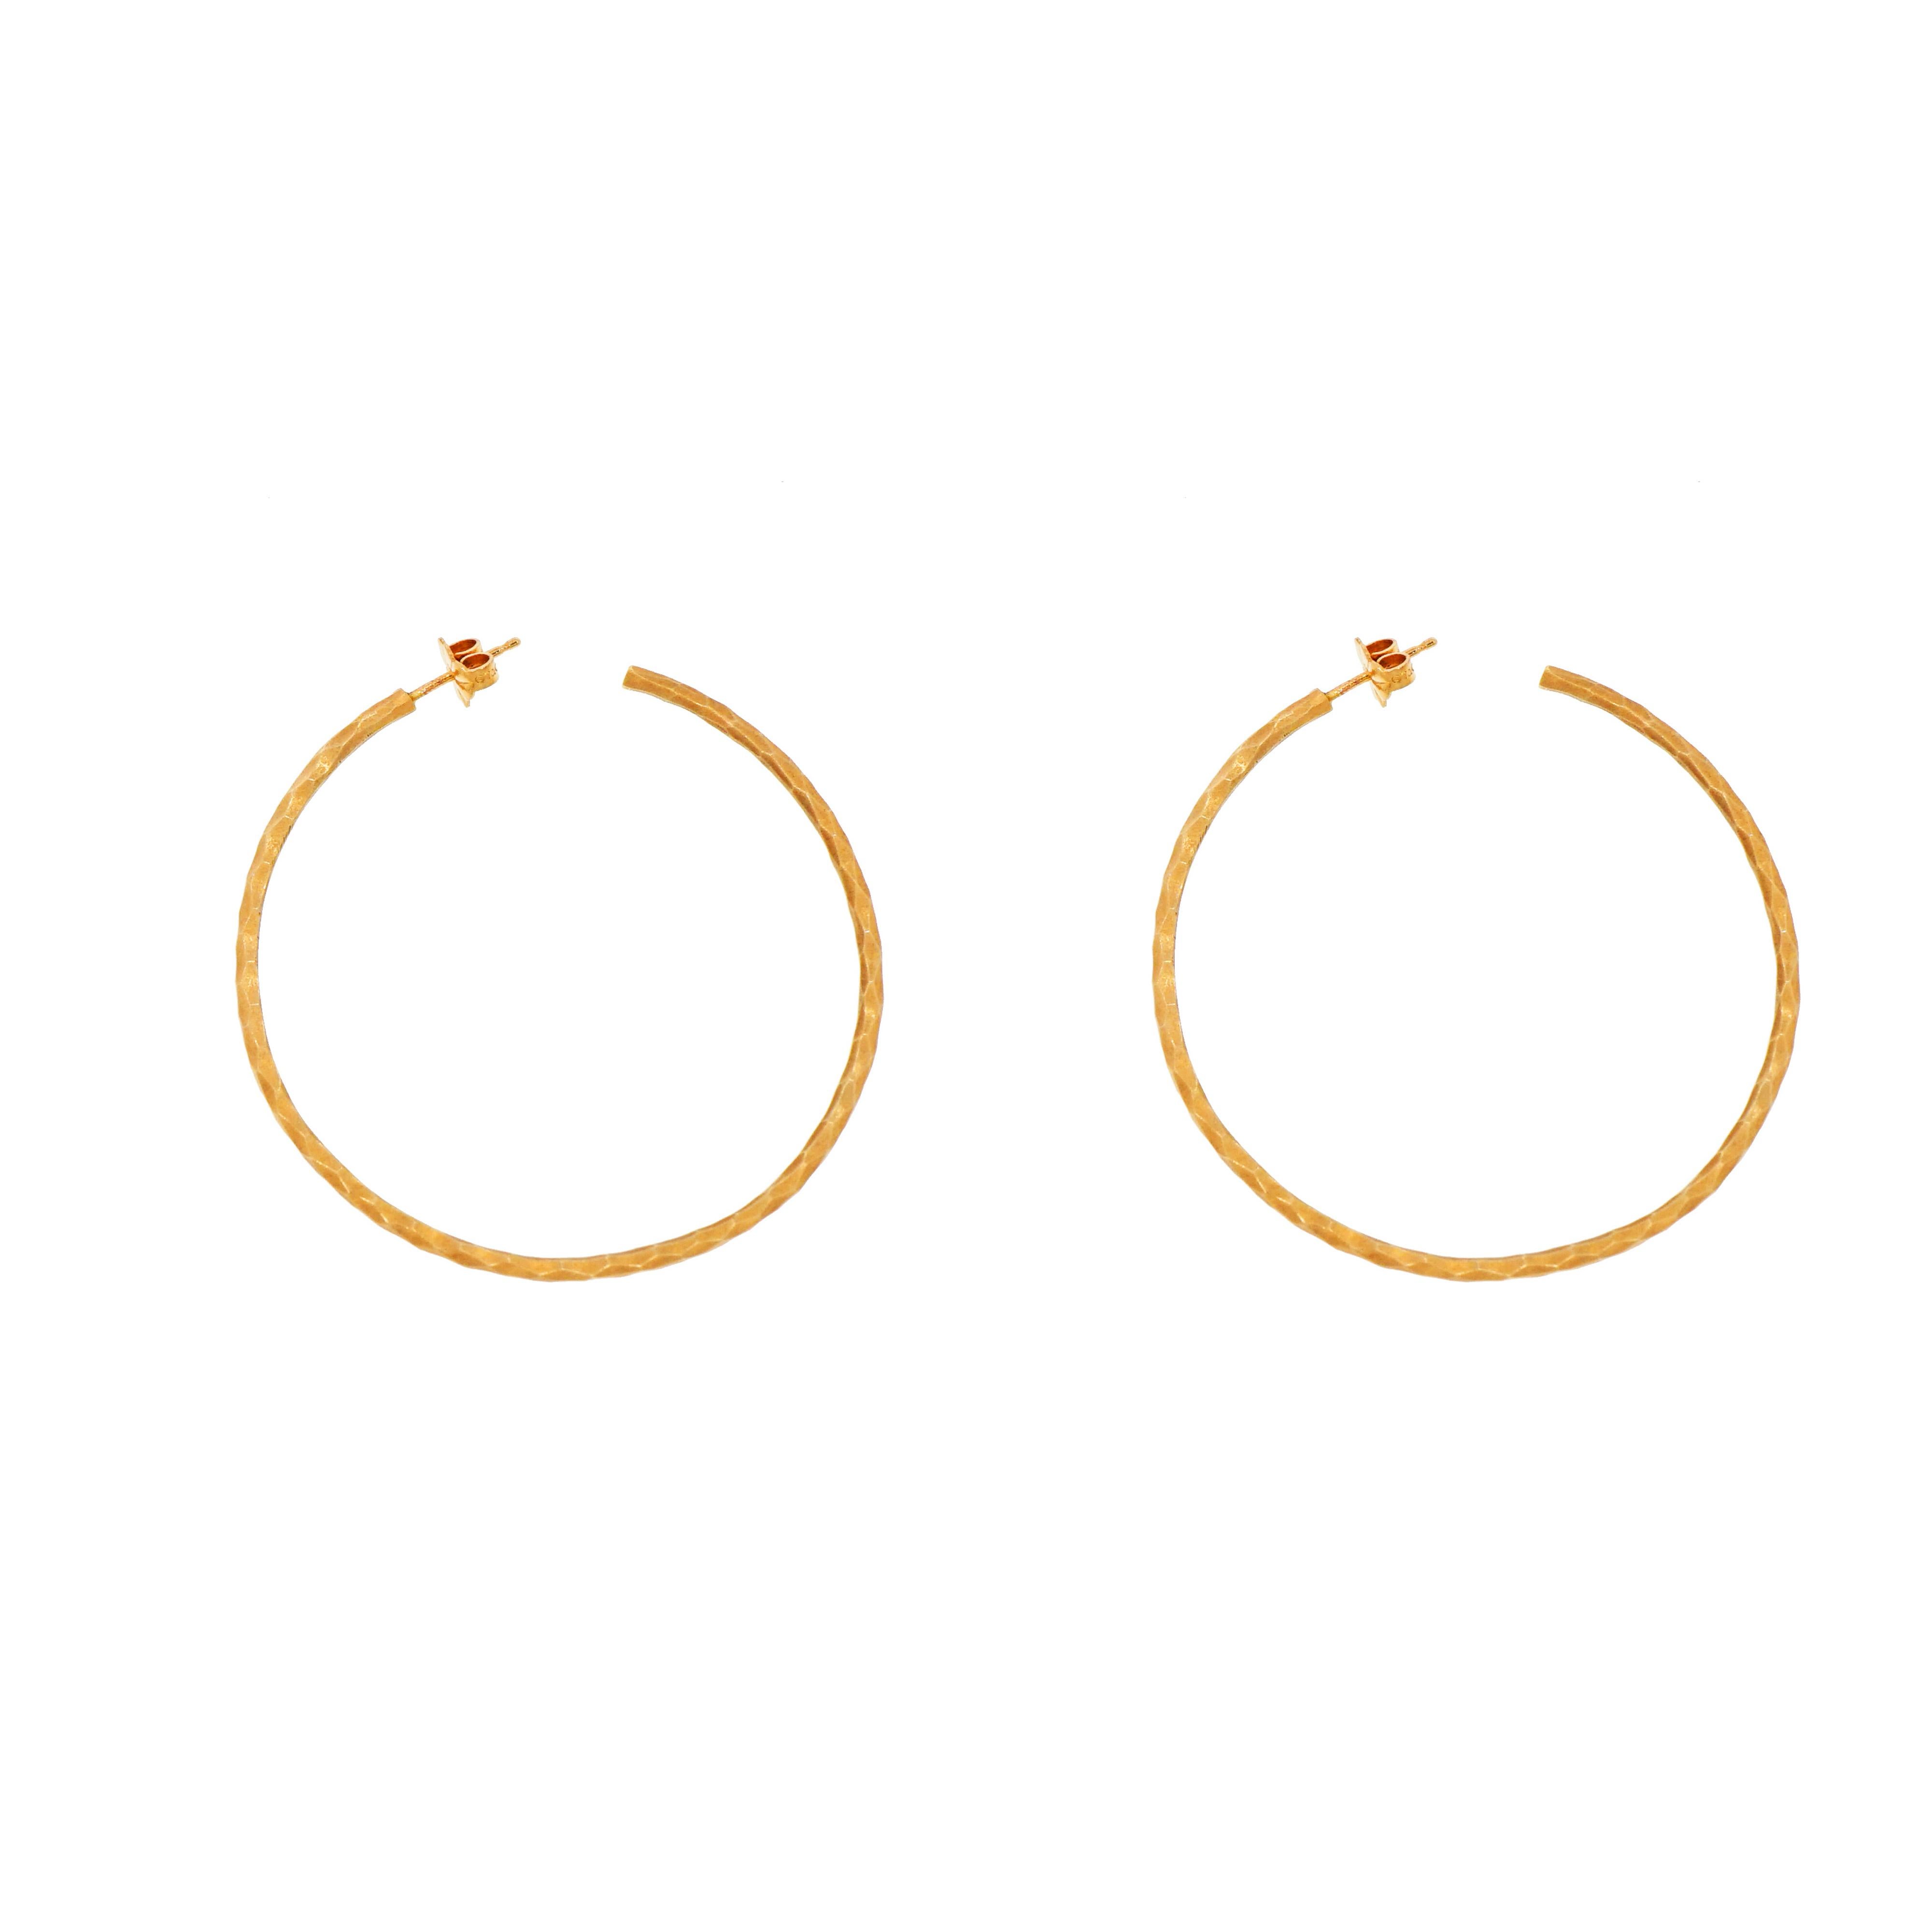 The best accessory for any occasion is a pair of Hoop Earrings!! 
Its just perfect for everyday wear or an evening out in town. 
Crafted in 18k rose gold by Tiffany & Co., measures approximately 49mm in diameter and has a diamond cut pattern with a